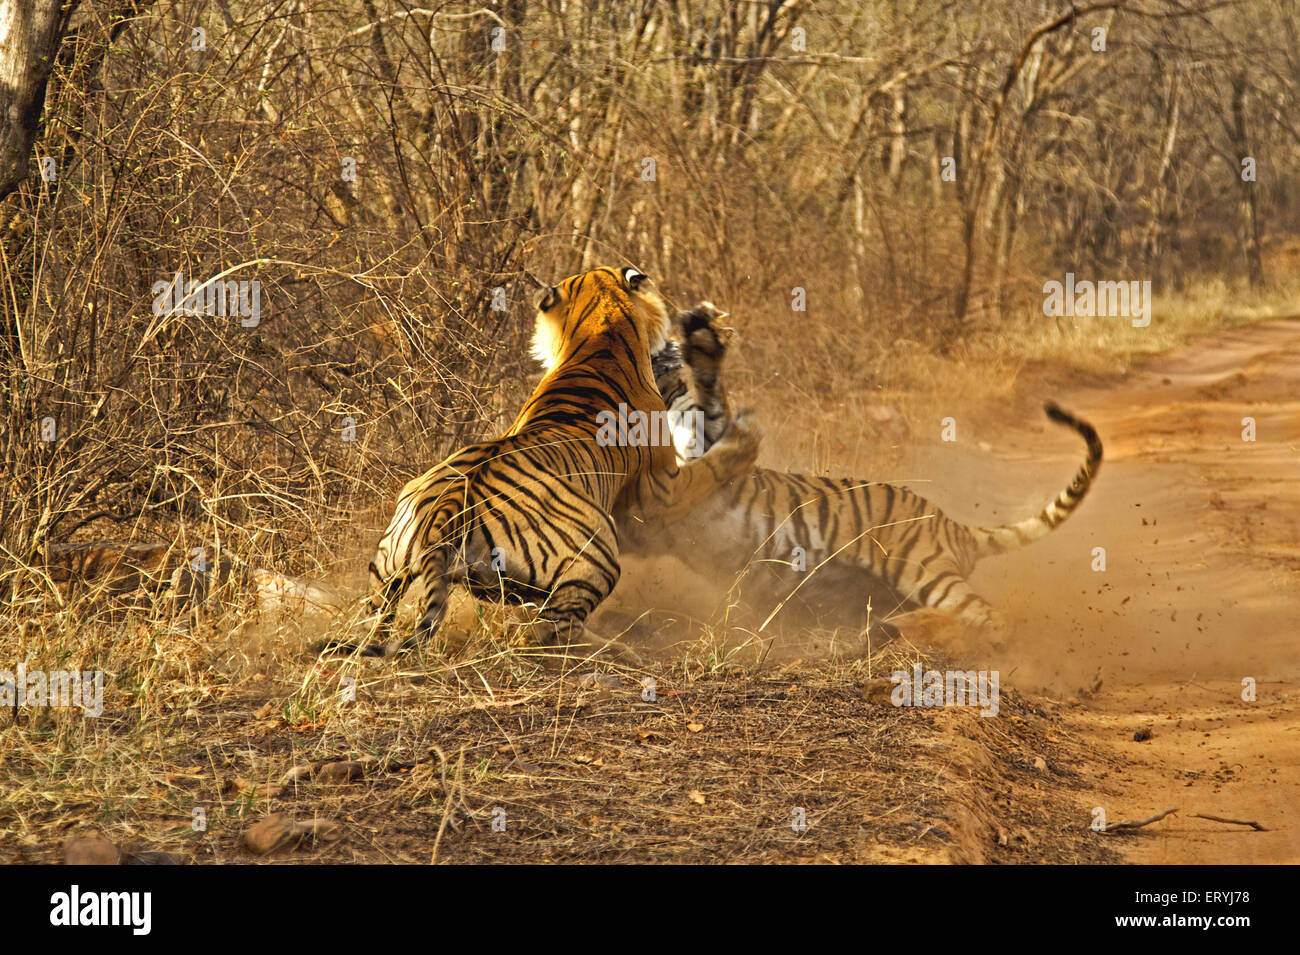 Tigers male and female fighting ; Ranthambore national park ; Rajasthan ; India Stock Photo